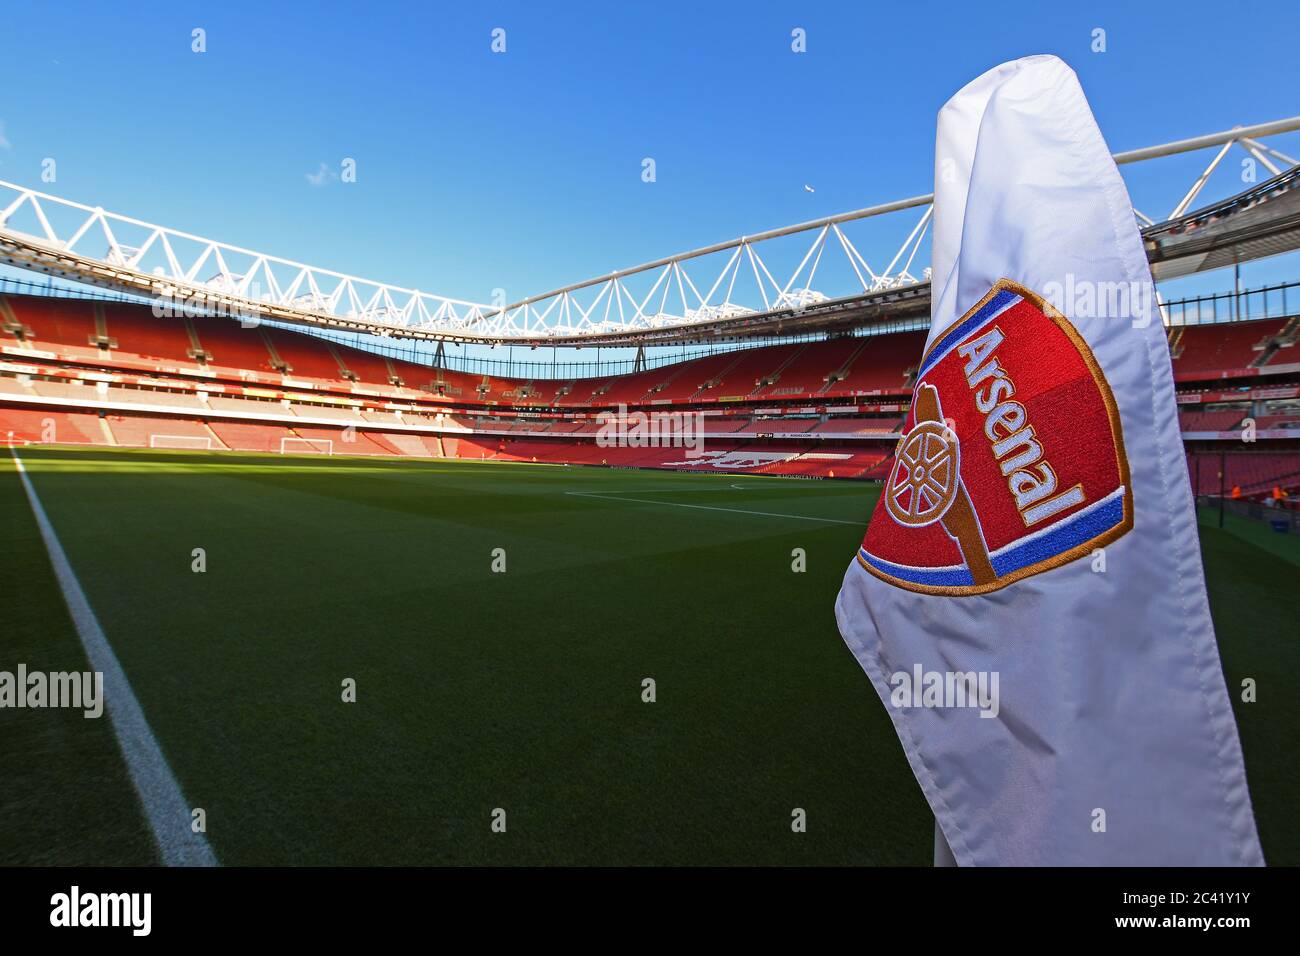 LONDON, ENGLAND - JANUARY 18, 2020: A corner flag with Arsenal crest pictured ahead of the 2019/20 Premier League game between Arsenal FC and Sheffield United FC at Emirates Stadium. Stock Photo